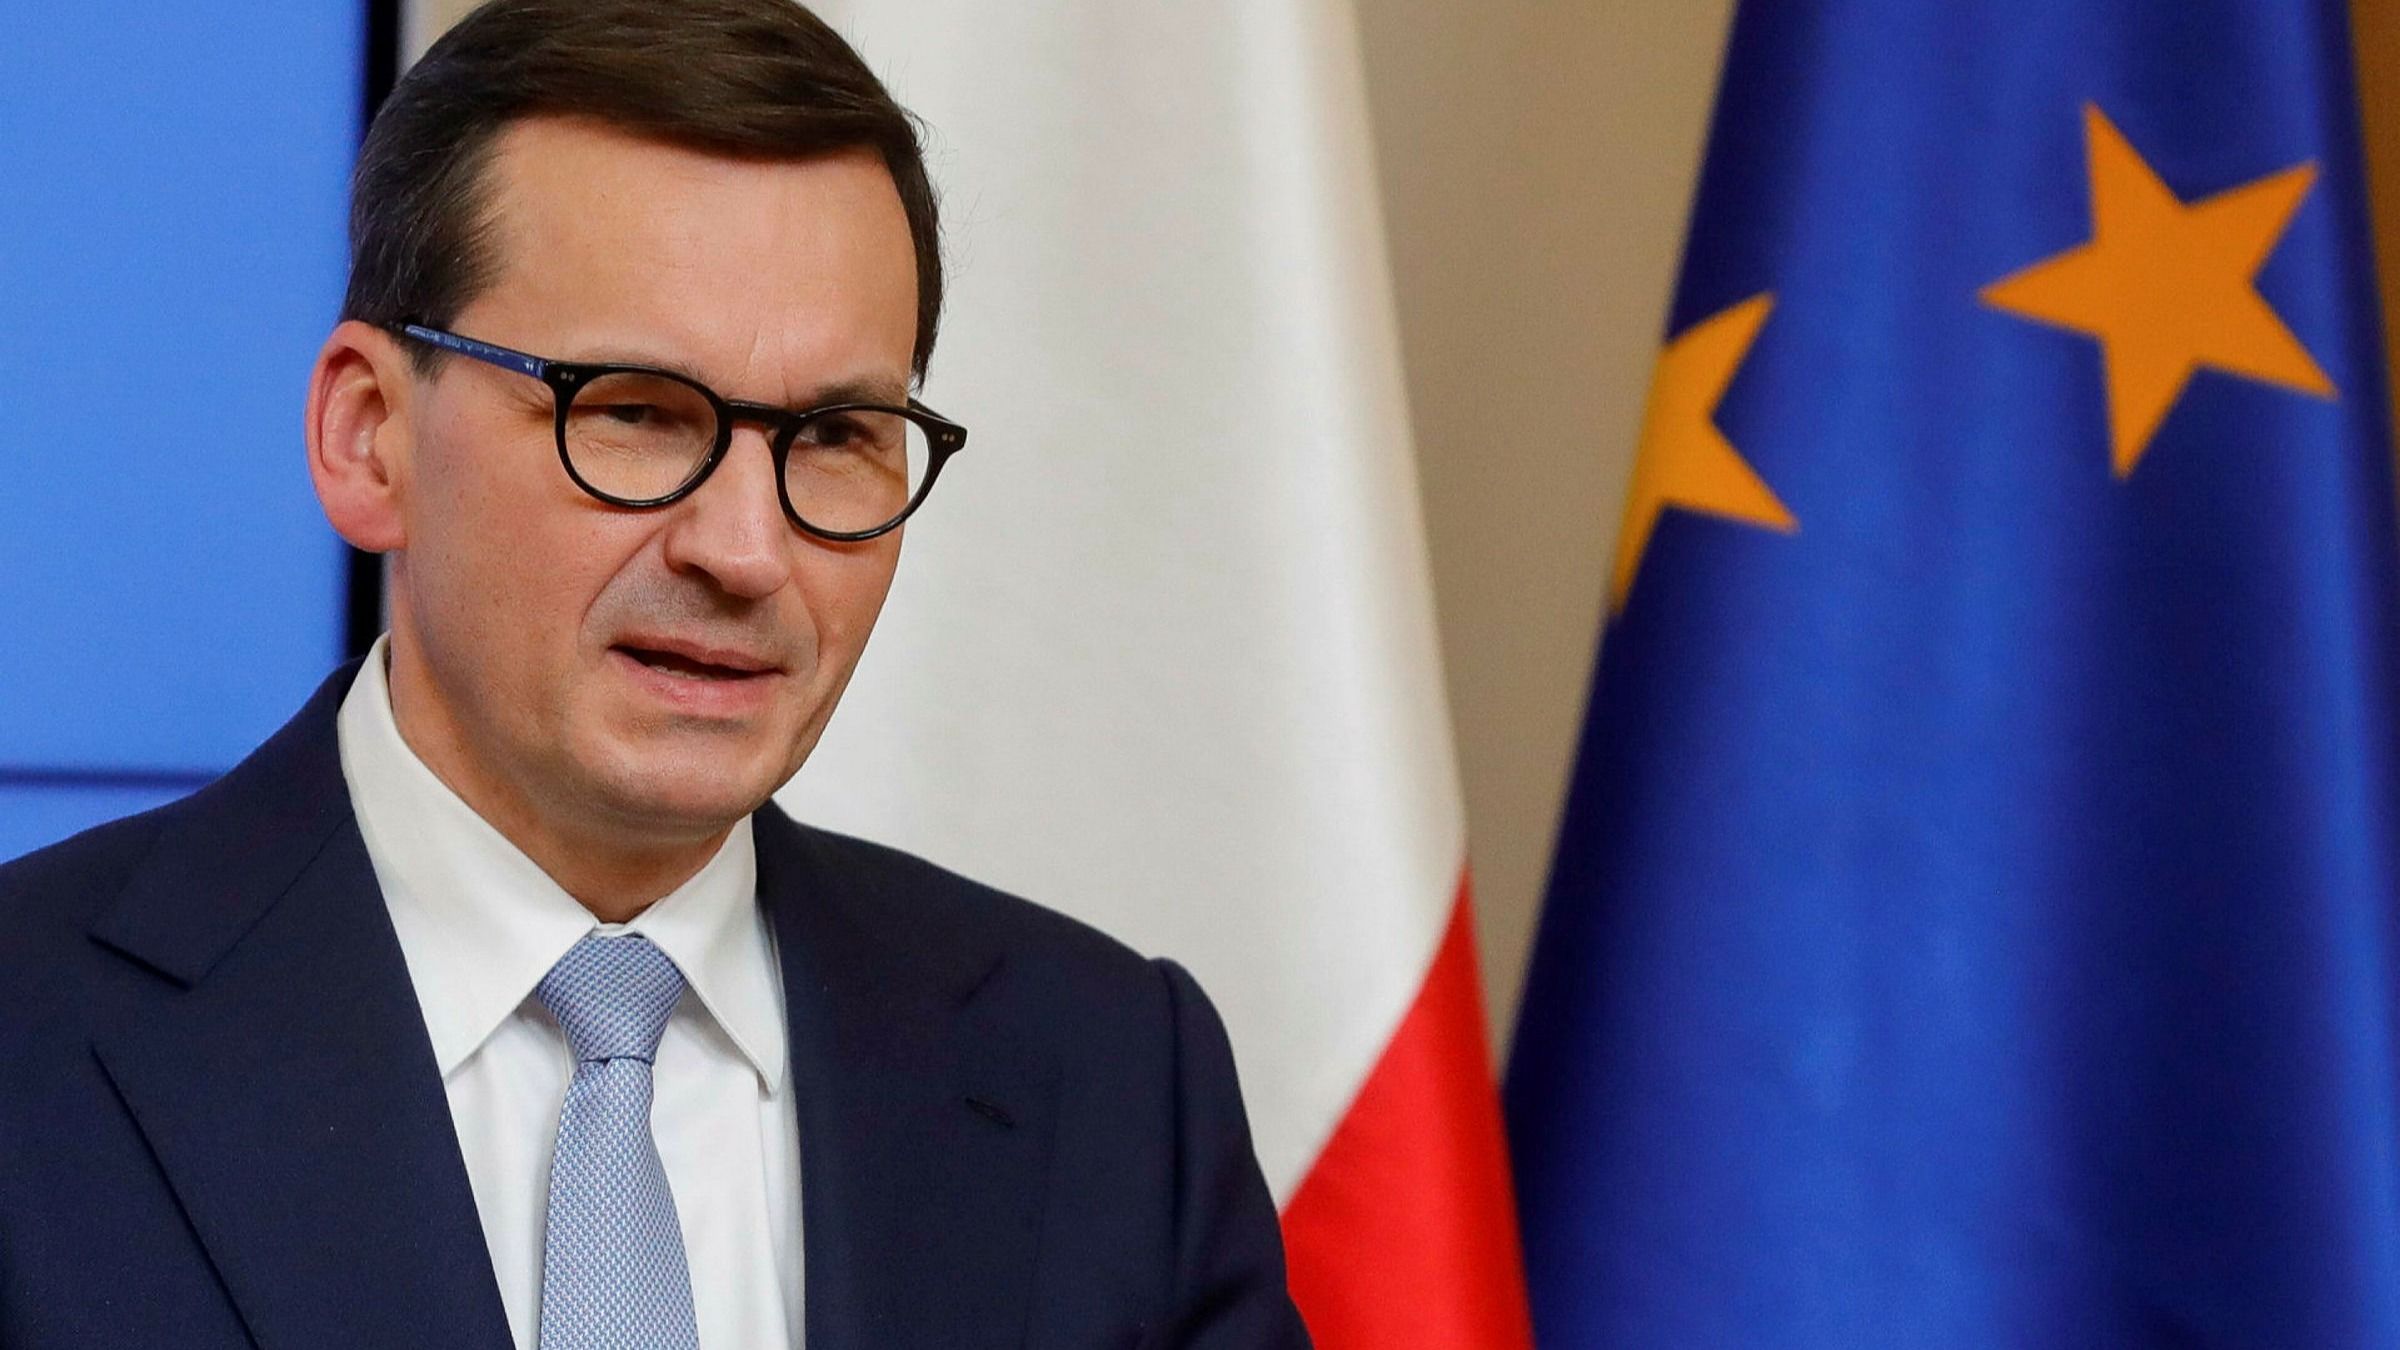 Polish Prime Minister Morawiecki refuses to pay players the promised bonus for 2022 World Cup